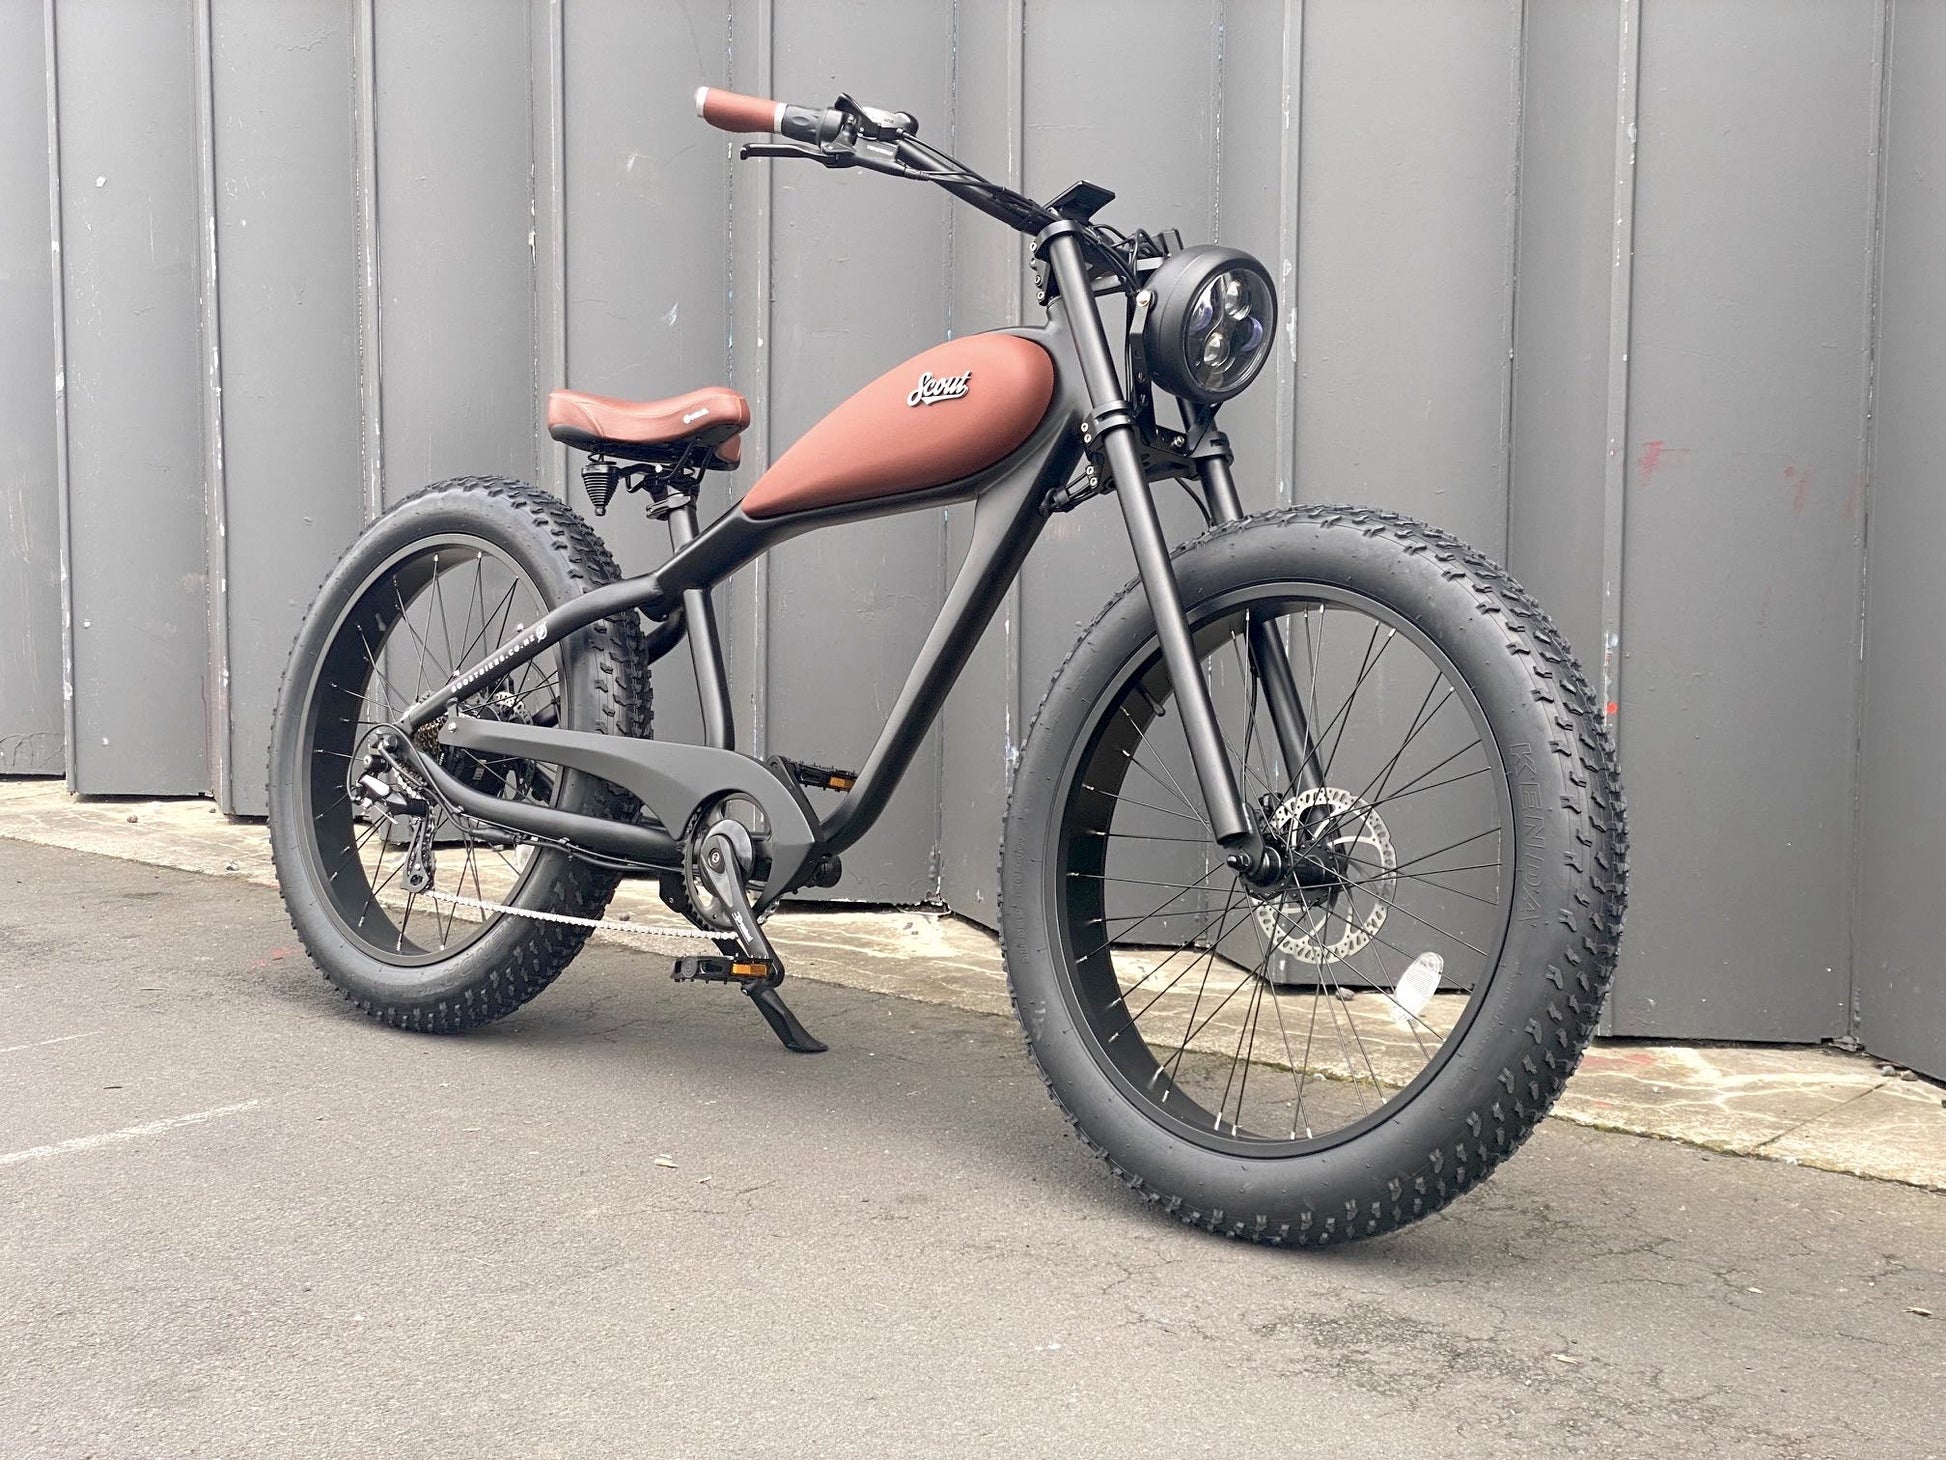 Retro Vintage Electric Motorbike styling combined with quality modern ebike components. This is one of the most comfortable cruiser bikes you will ever ride. Scout from Boostbikes